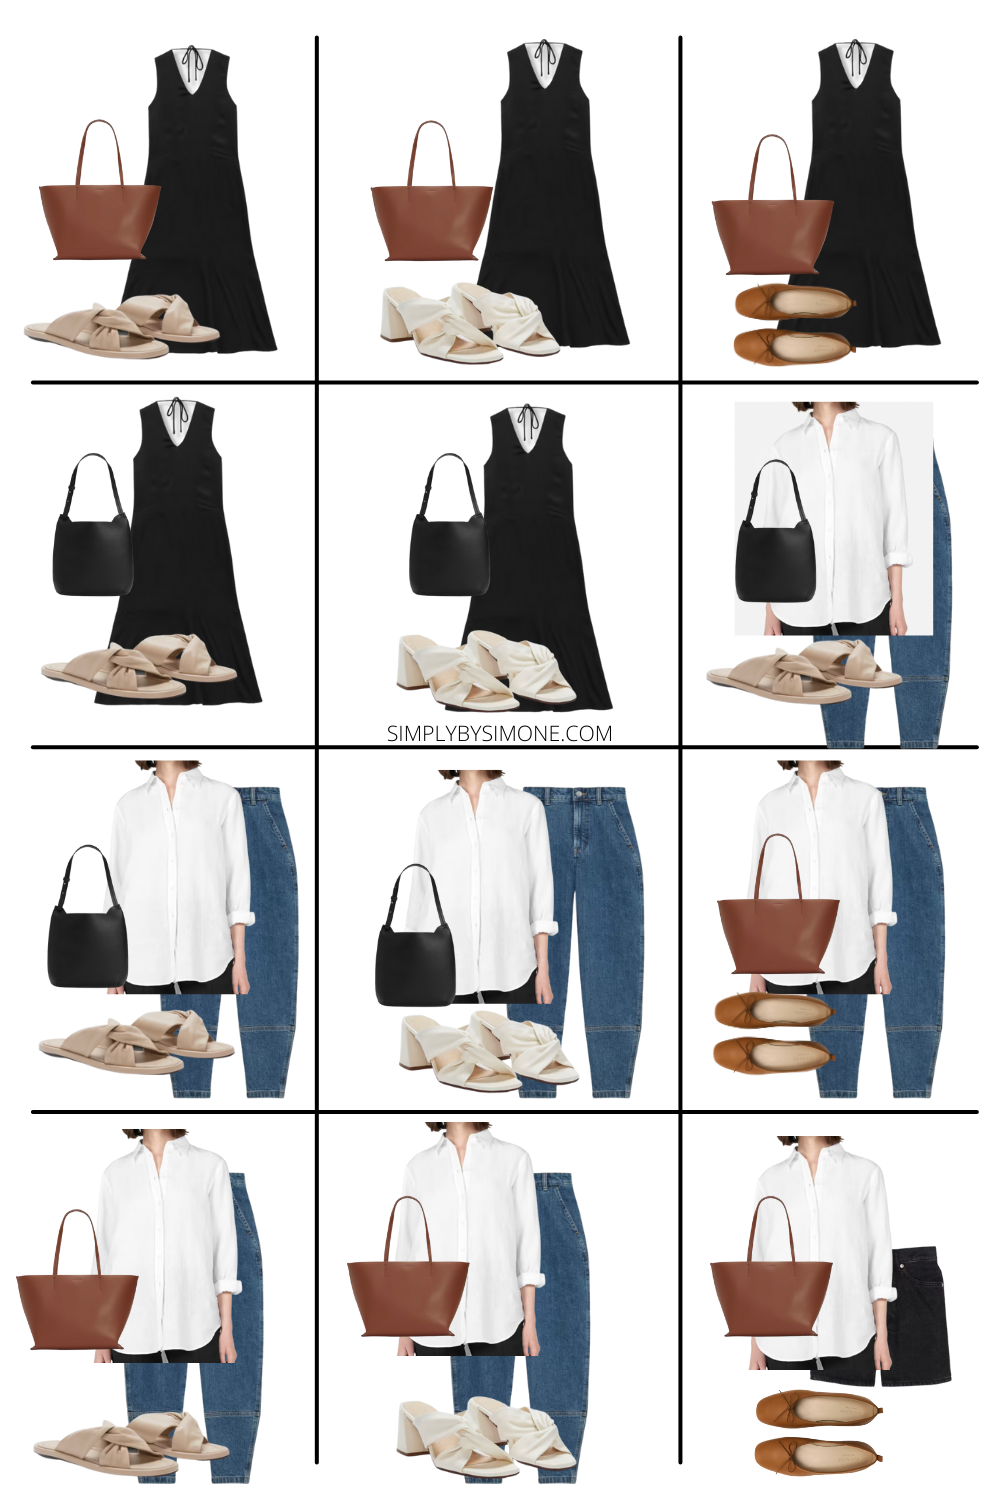 Affordable Everlane Summer Capsule Wardrobe | 12 Pieces, 48 Outfits | How to Build a Capsule Wardrobe | Everlane Summer Clothes | Outfit Inspiration | 48 Summer Weather Outfit Ideas | Summer Vacation Packing Guide | Everlane Summer Capsule Wardrobe - What To Wear This Summer 2023, European Outfit Ideas | Looks 37-48 | Simply by Simone